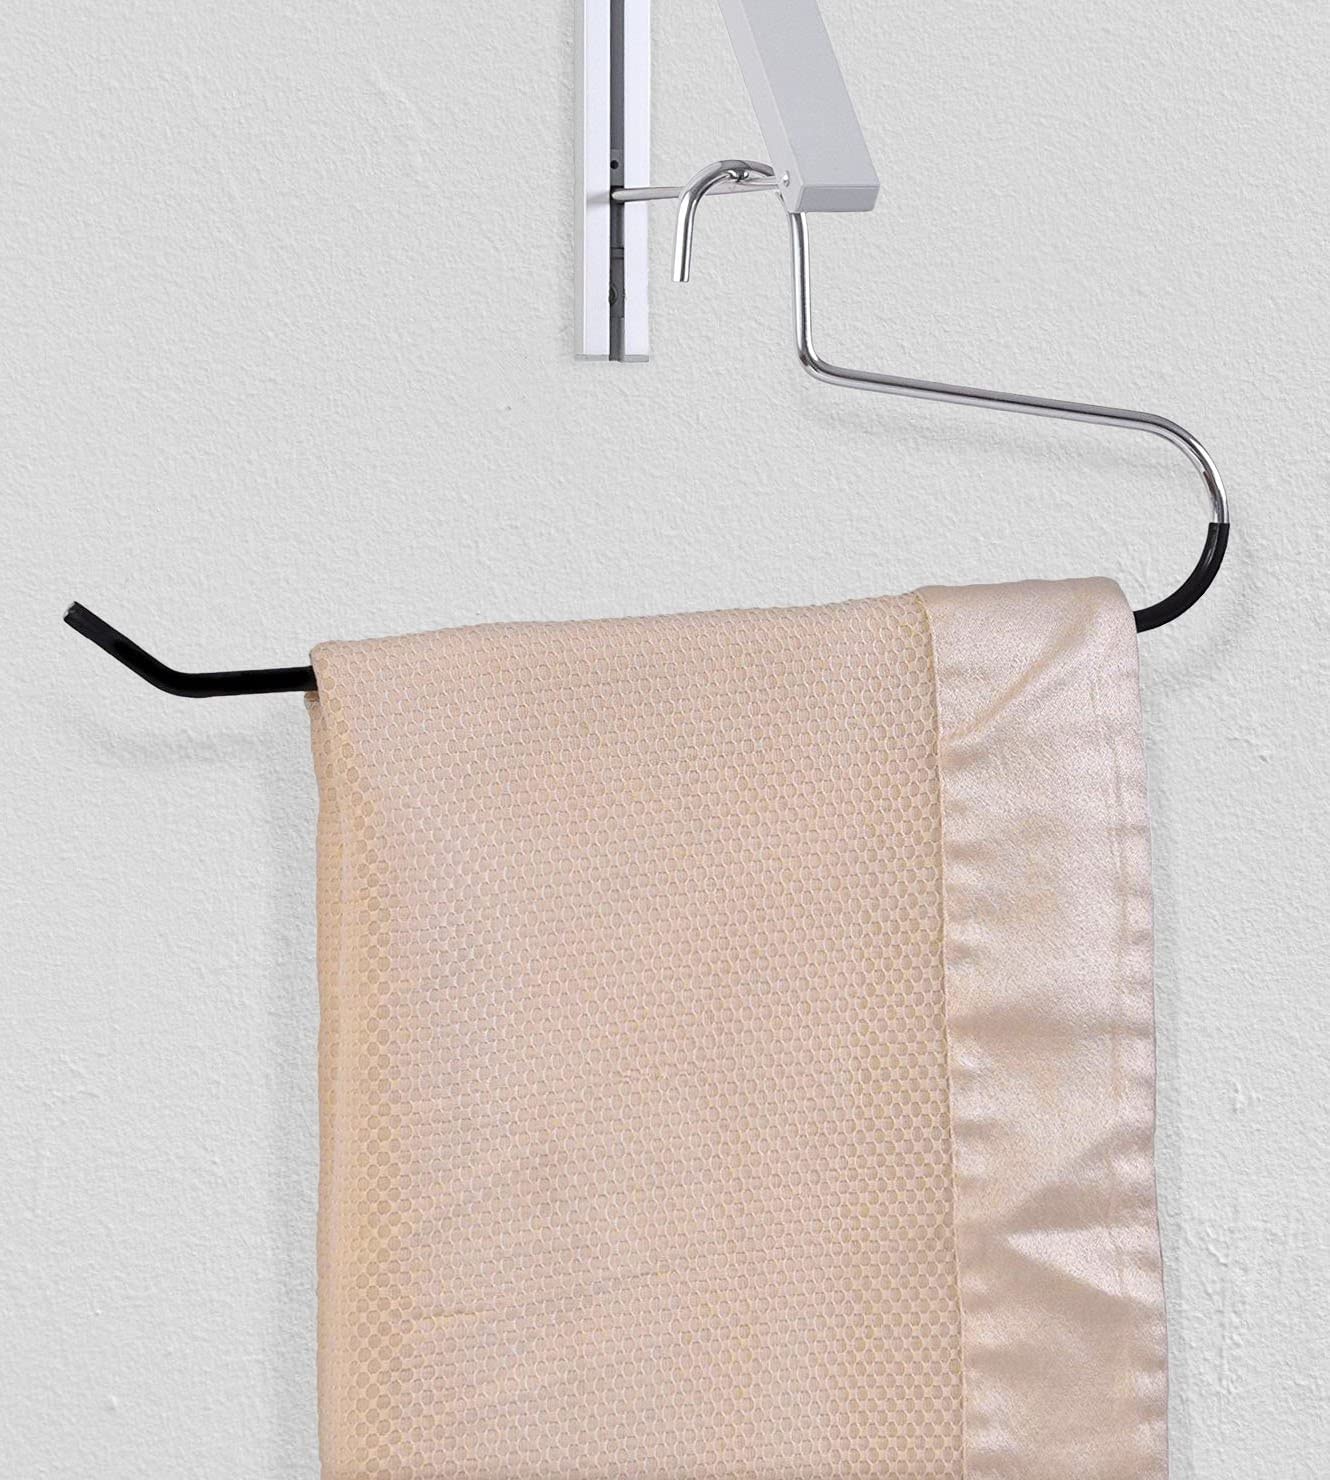 Stock Your Home Folding Clothes Hanger Wall Mounted Retractable Clothe